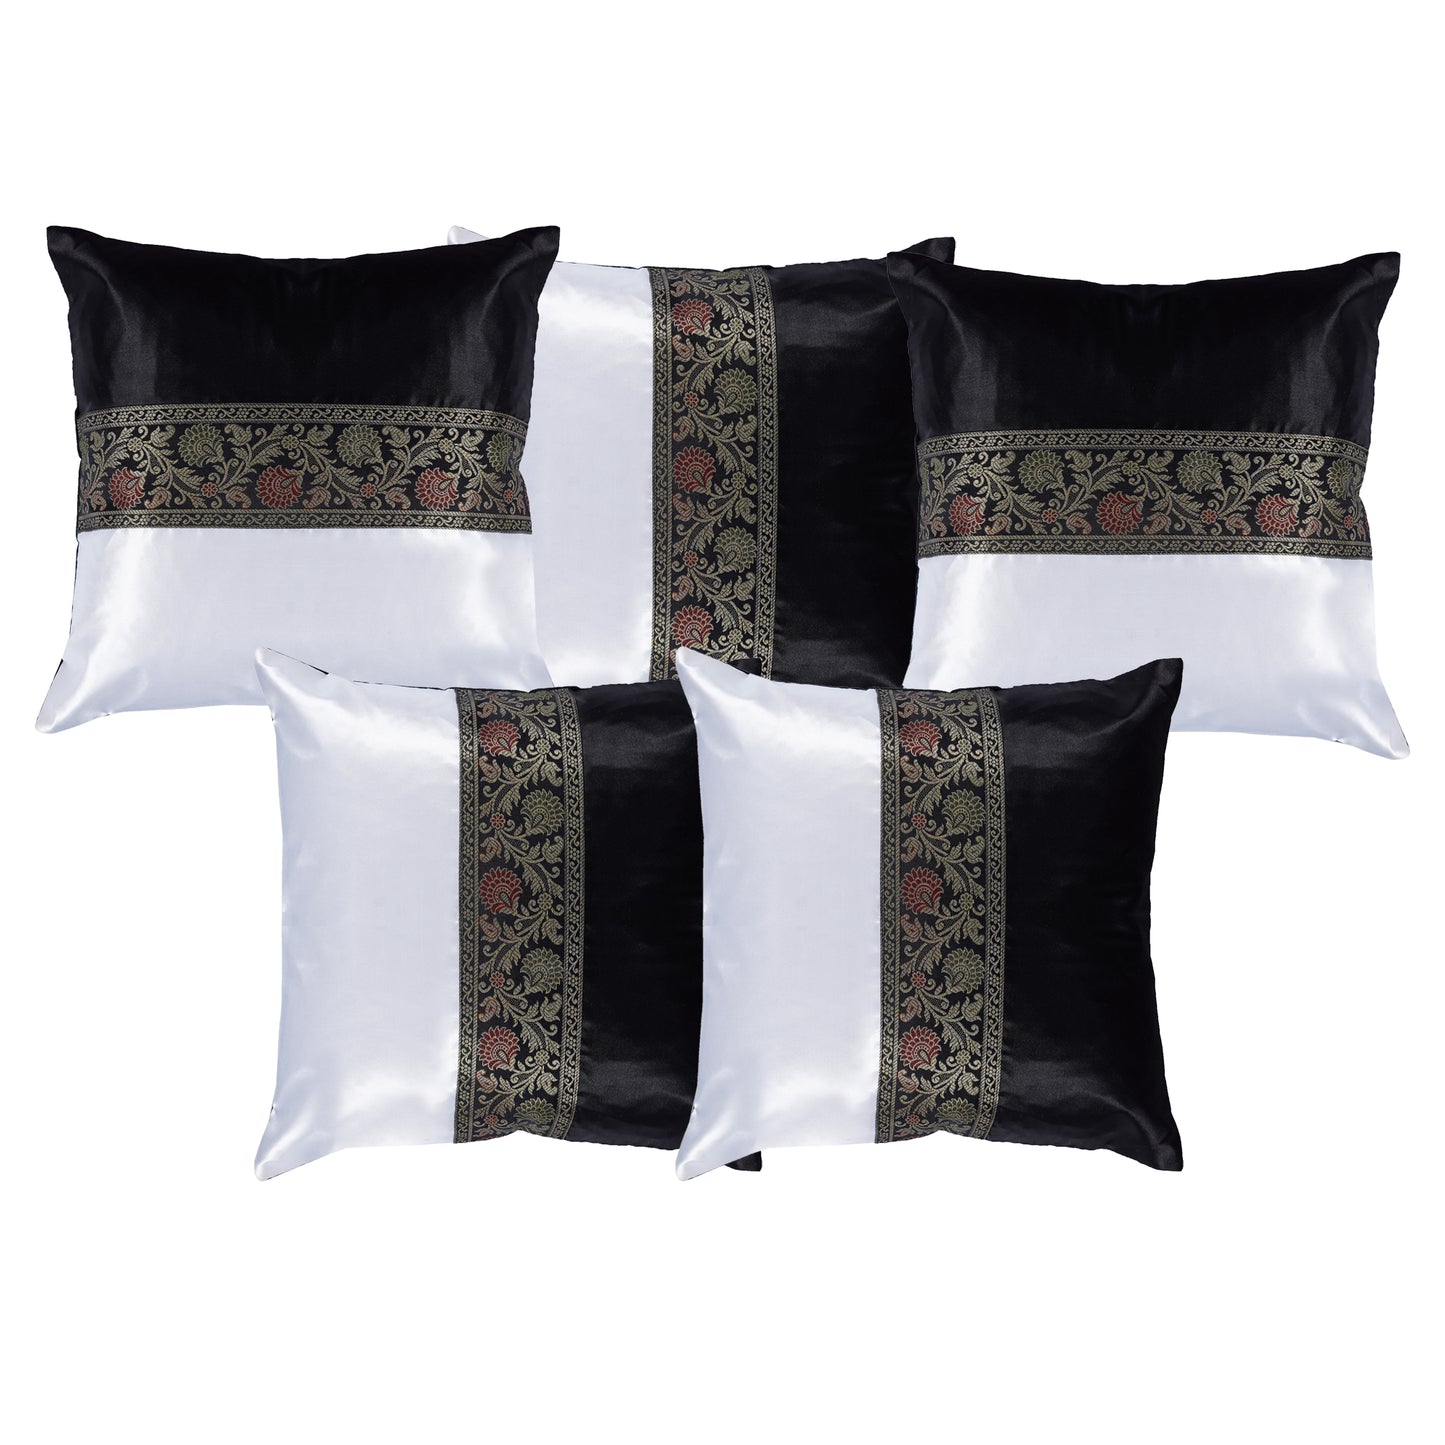 Set of 2 Pc Indian Solid Soft Silky Satin Black & White Cushion Covers Square Throw Decorative Pillowcases for Couch Sofa Home Décor 16X16 In